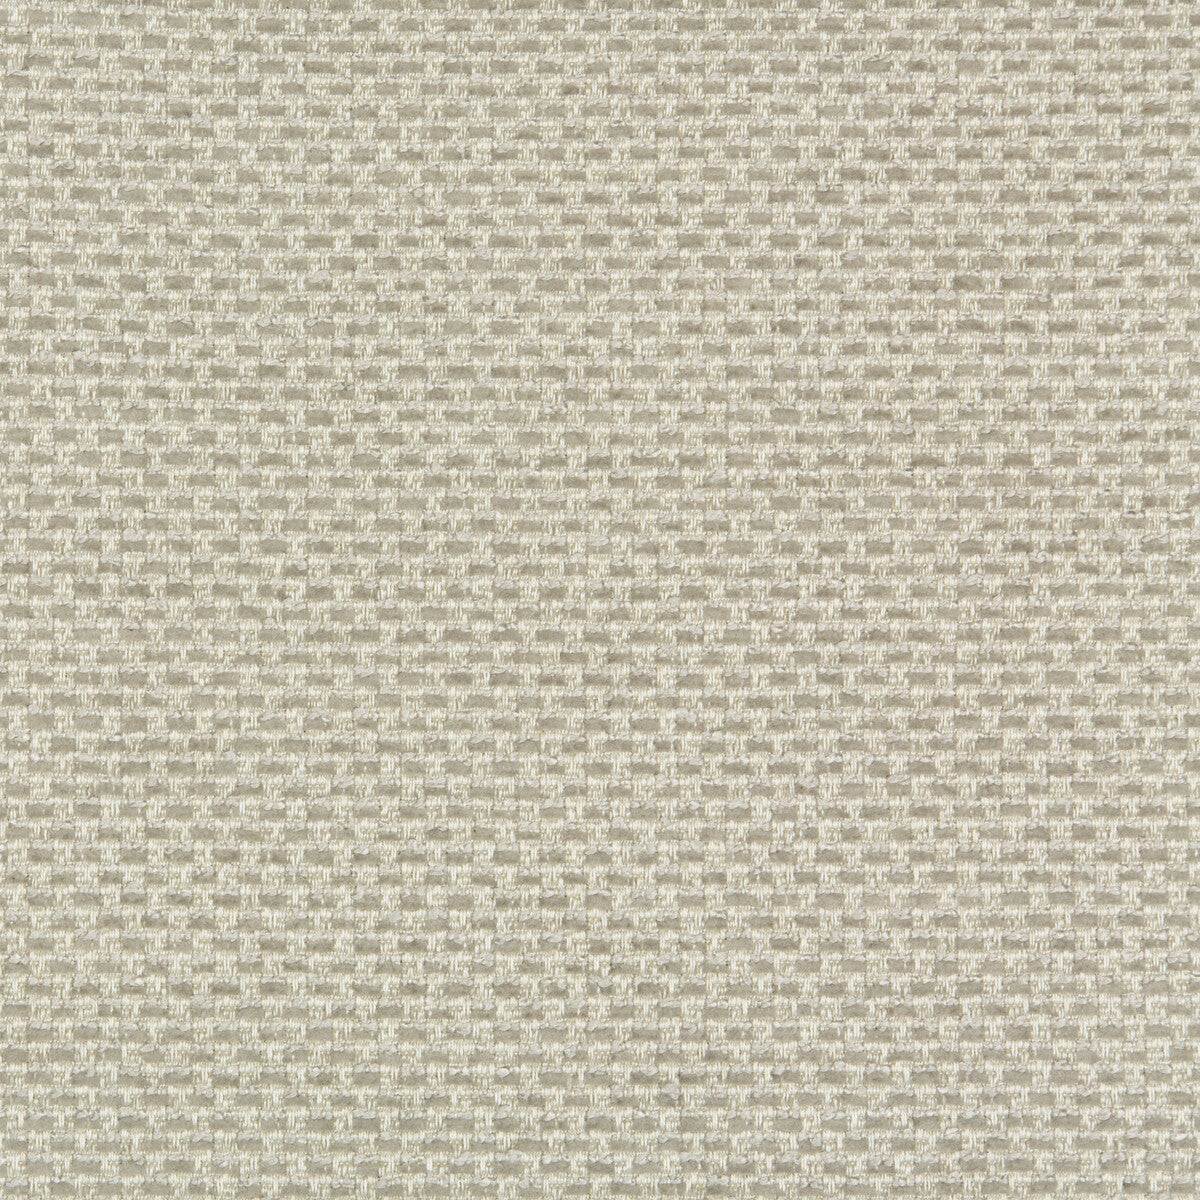 Kravet Contract fabric in 34739-11 color - pattern 34739.11.0 - by Kravet Contract in the Incase Crypton Gis collection